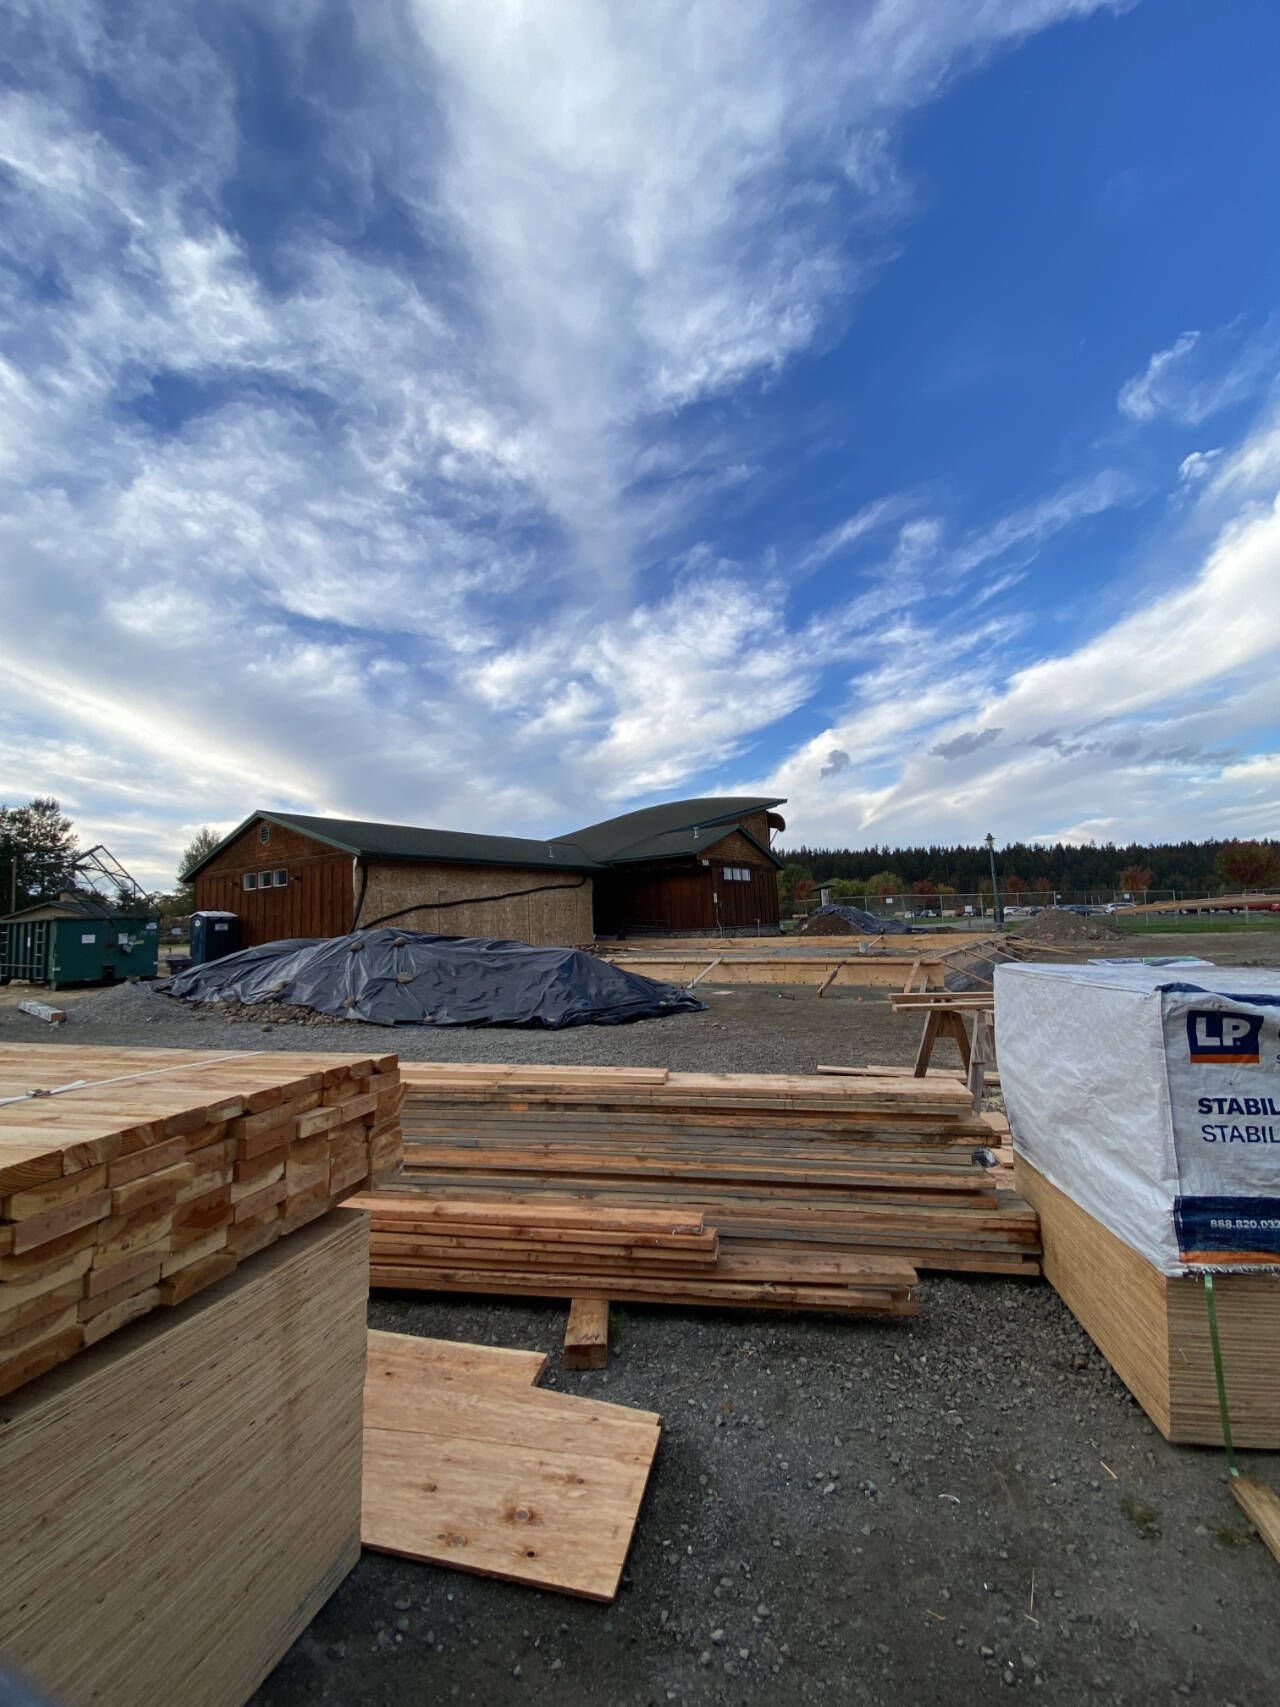 Photo by Vicky Blakesley/Sequim City Band/ Expansion of the Sequim City Band’s Rehearsal Hall continues. The site has been excavated and concrete pours completed for the footings and foundation.